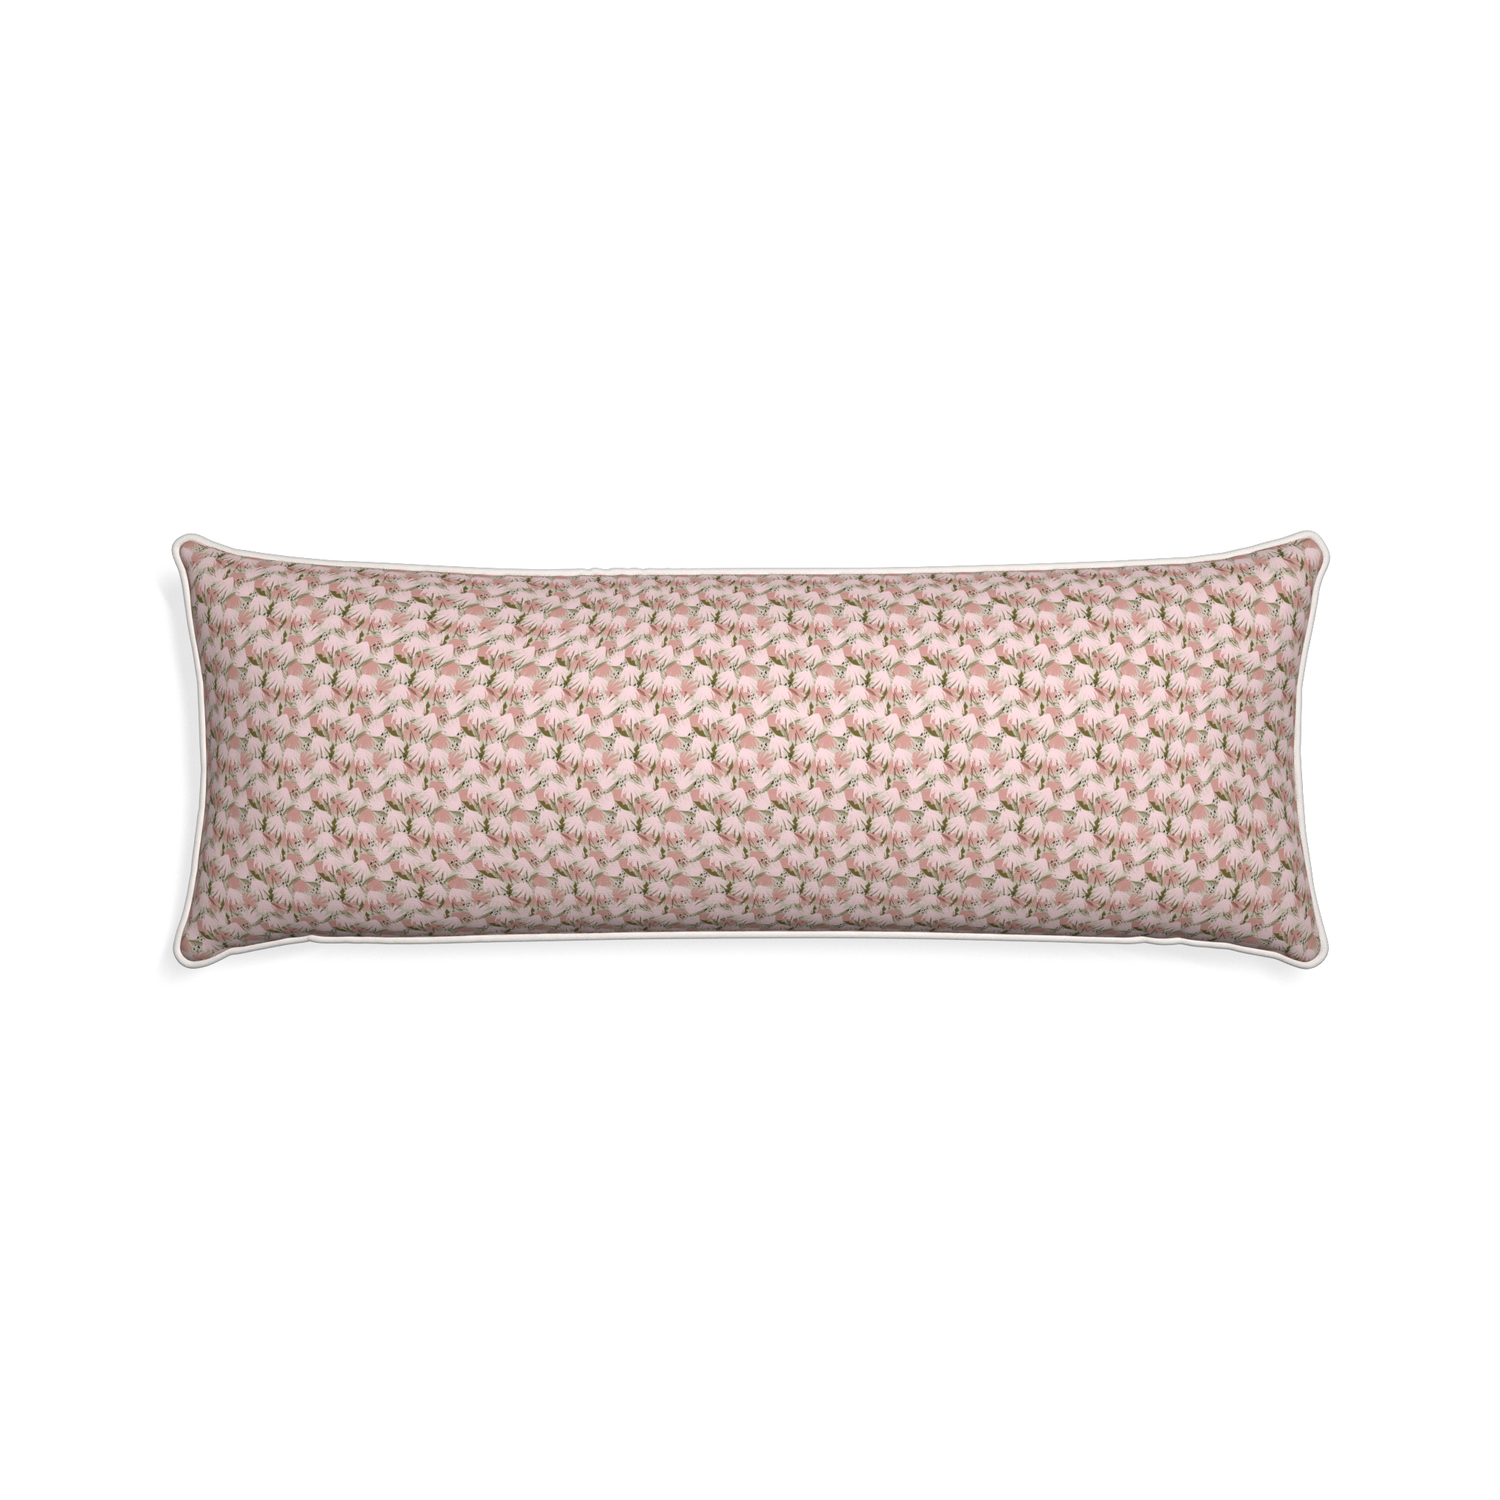 Xl-lumbar eden pink custom pink floralpillow with snow piping on white background